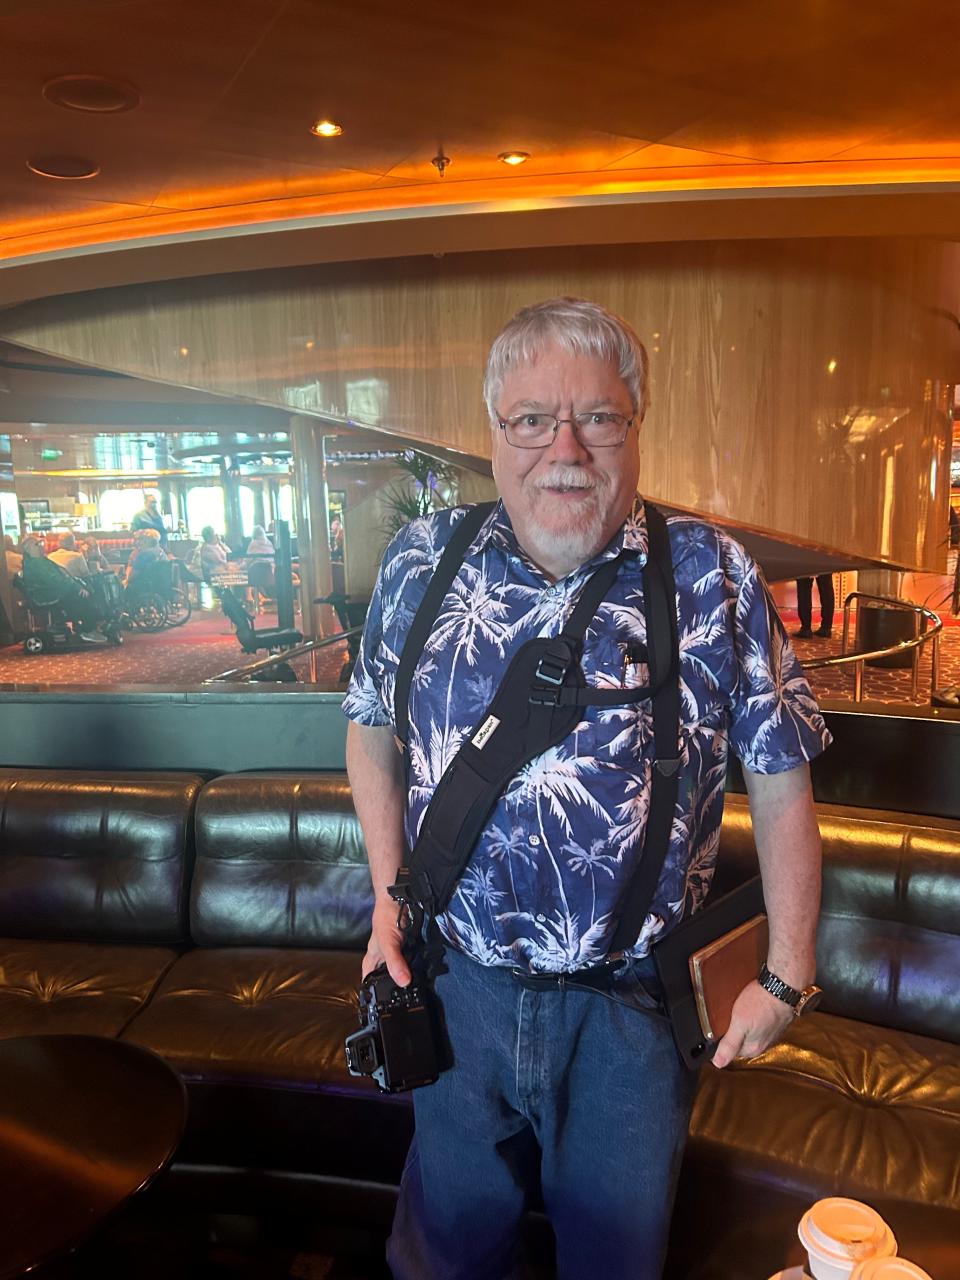 Dan Jarrell has been chasing the eclipse on cruises since 1991. He also saw a solar eclipse in 1998 from another Holland America ship.